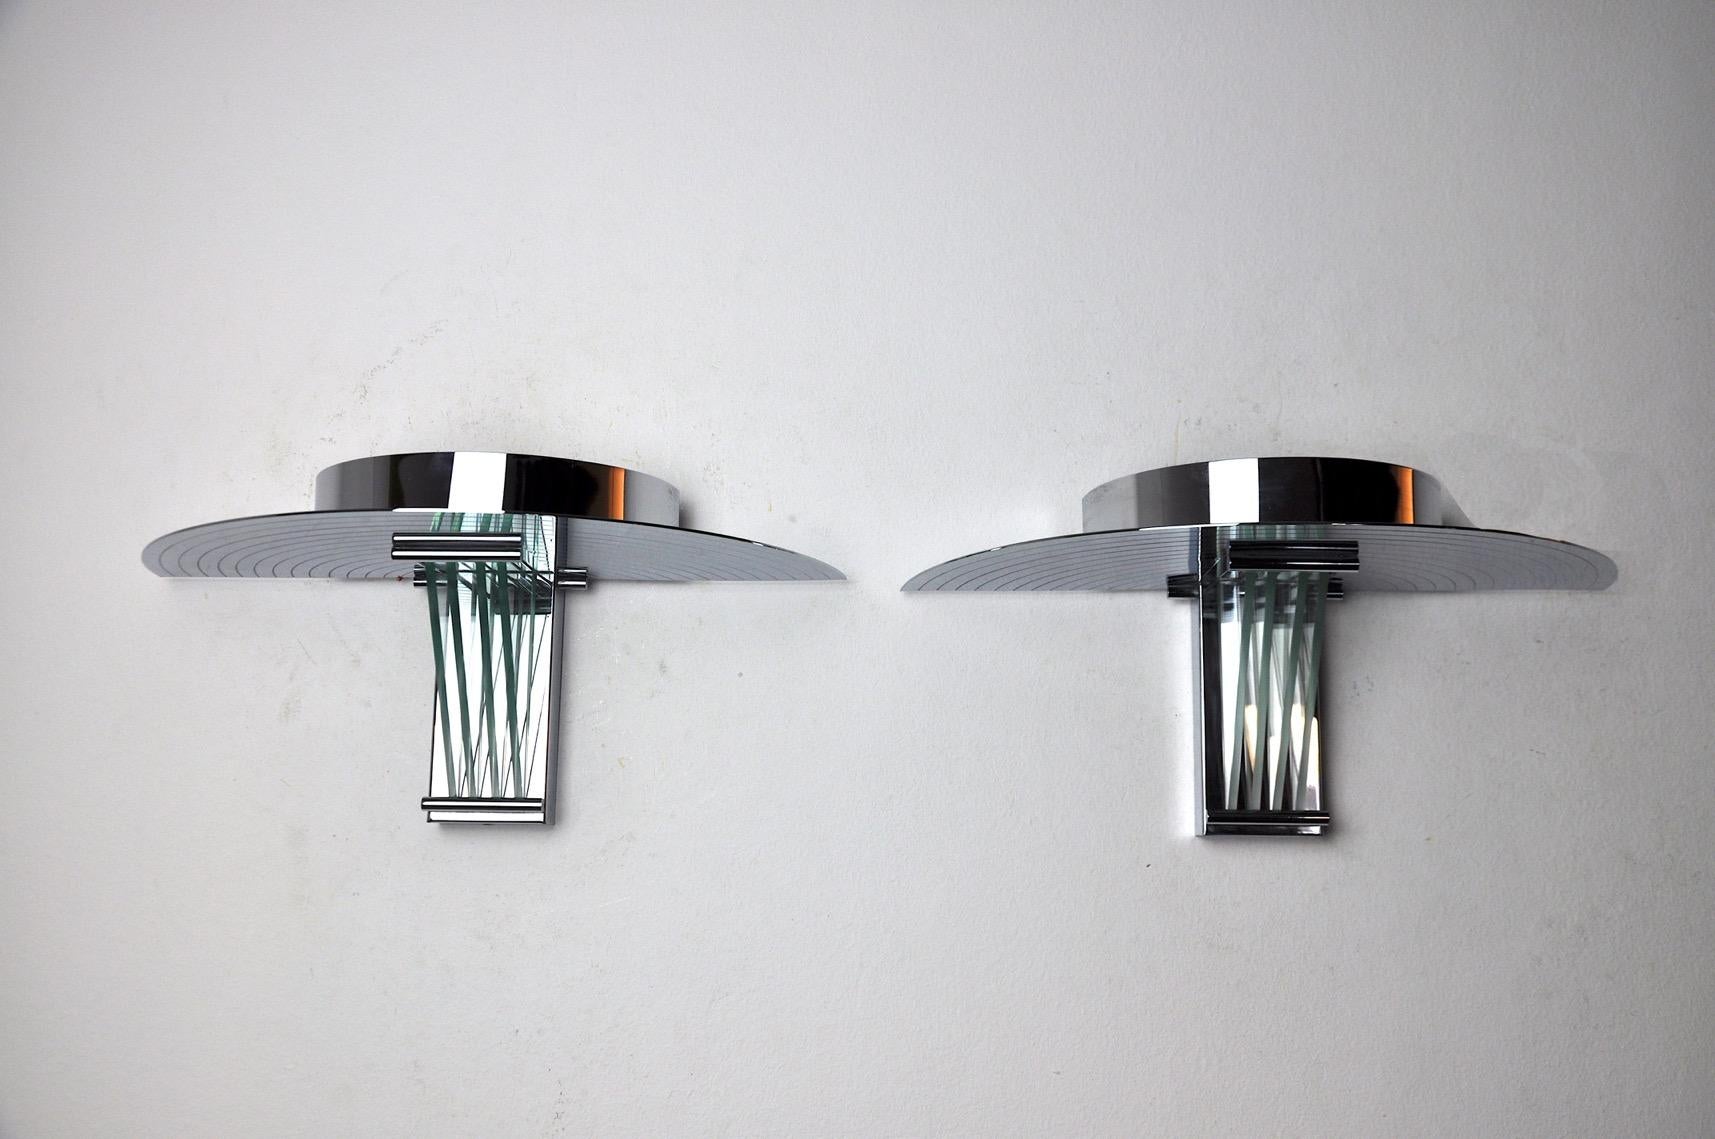 Pair of wall lights by designer garcia garay in the memphis style, designed and produced in spain in the 1970s. Cut glass and chromed metal structure. Unique object that will illuminate and bring a real design touch to your interior. Electricity